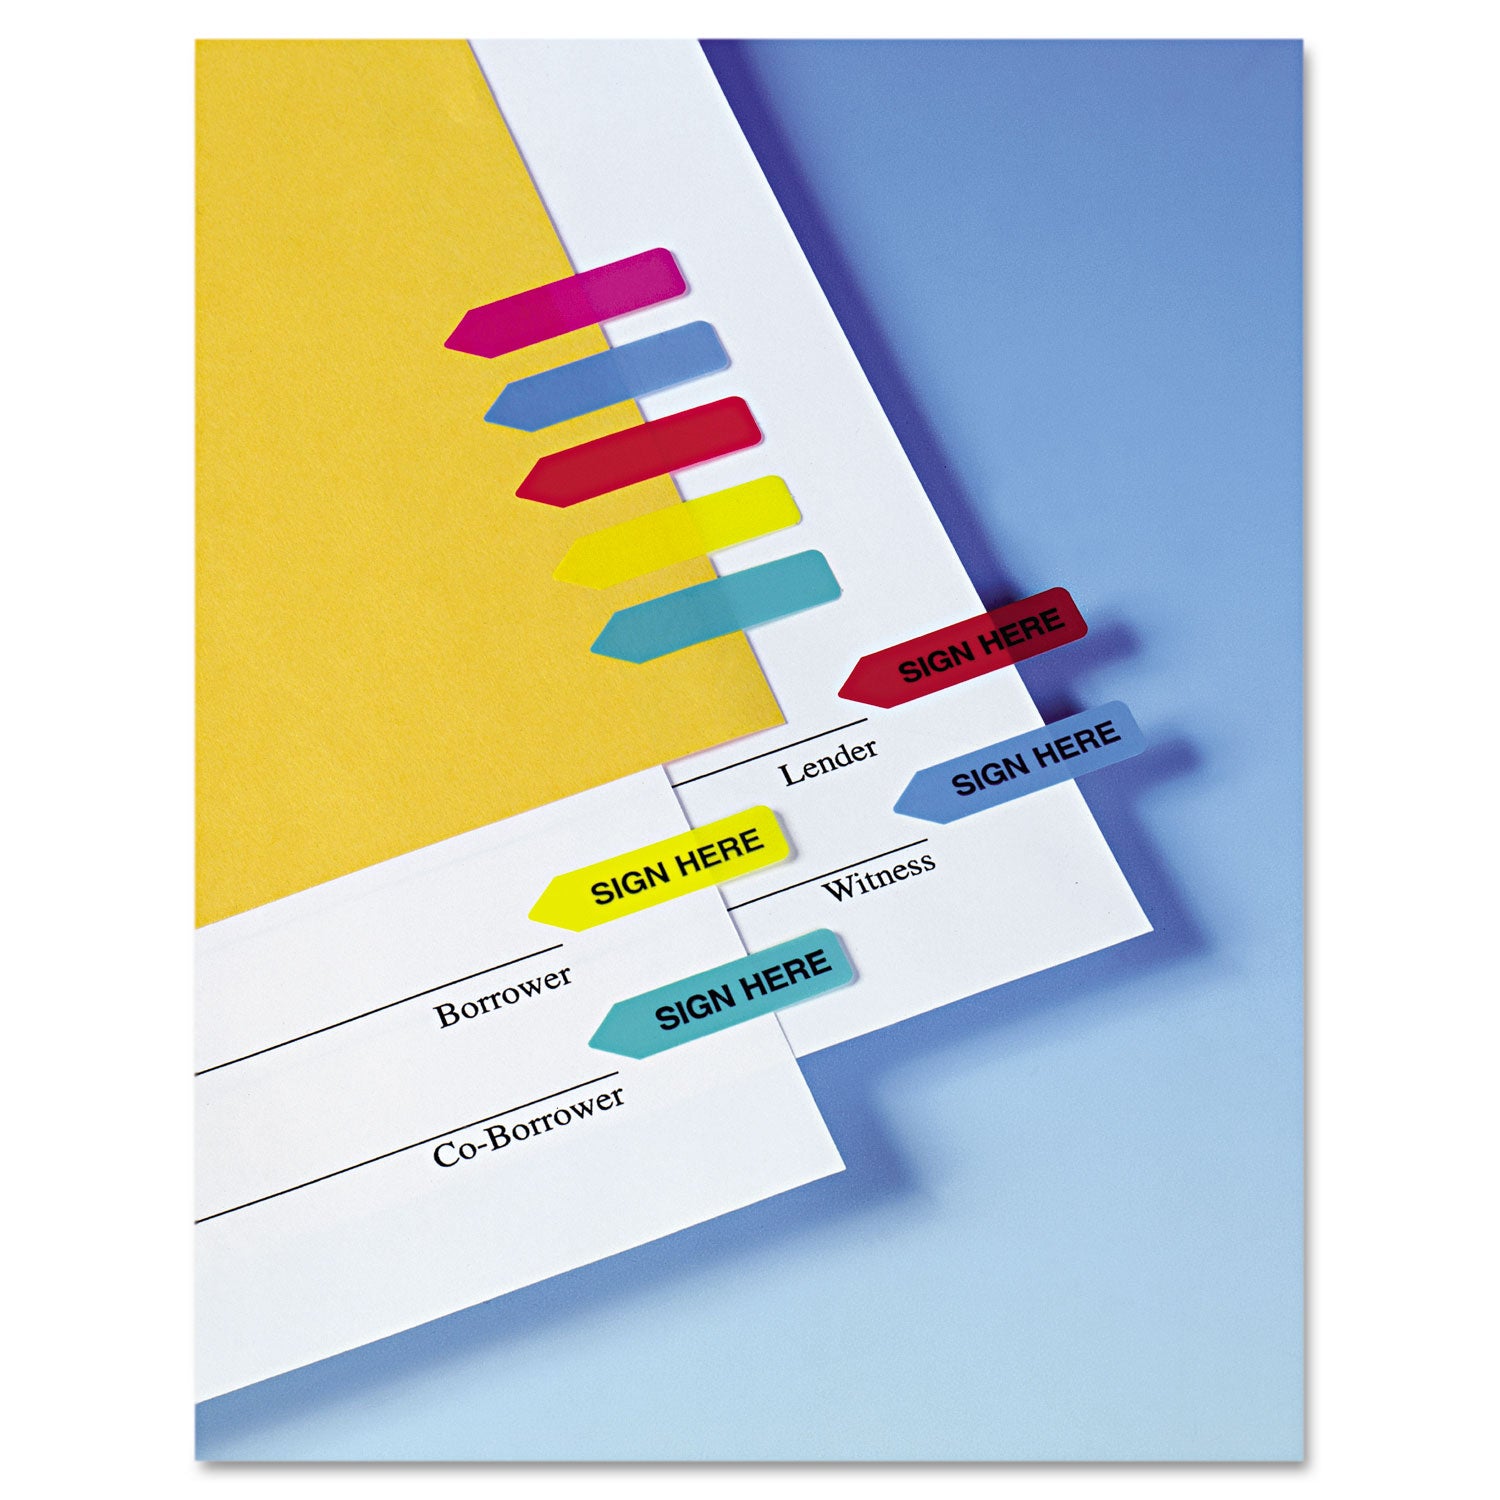 Mini Arrow Page Flags, "Sign Here", Blue/Mint/Red/Yellow, 126 Flags/Pack - 